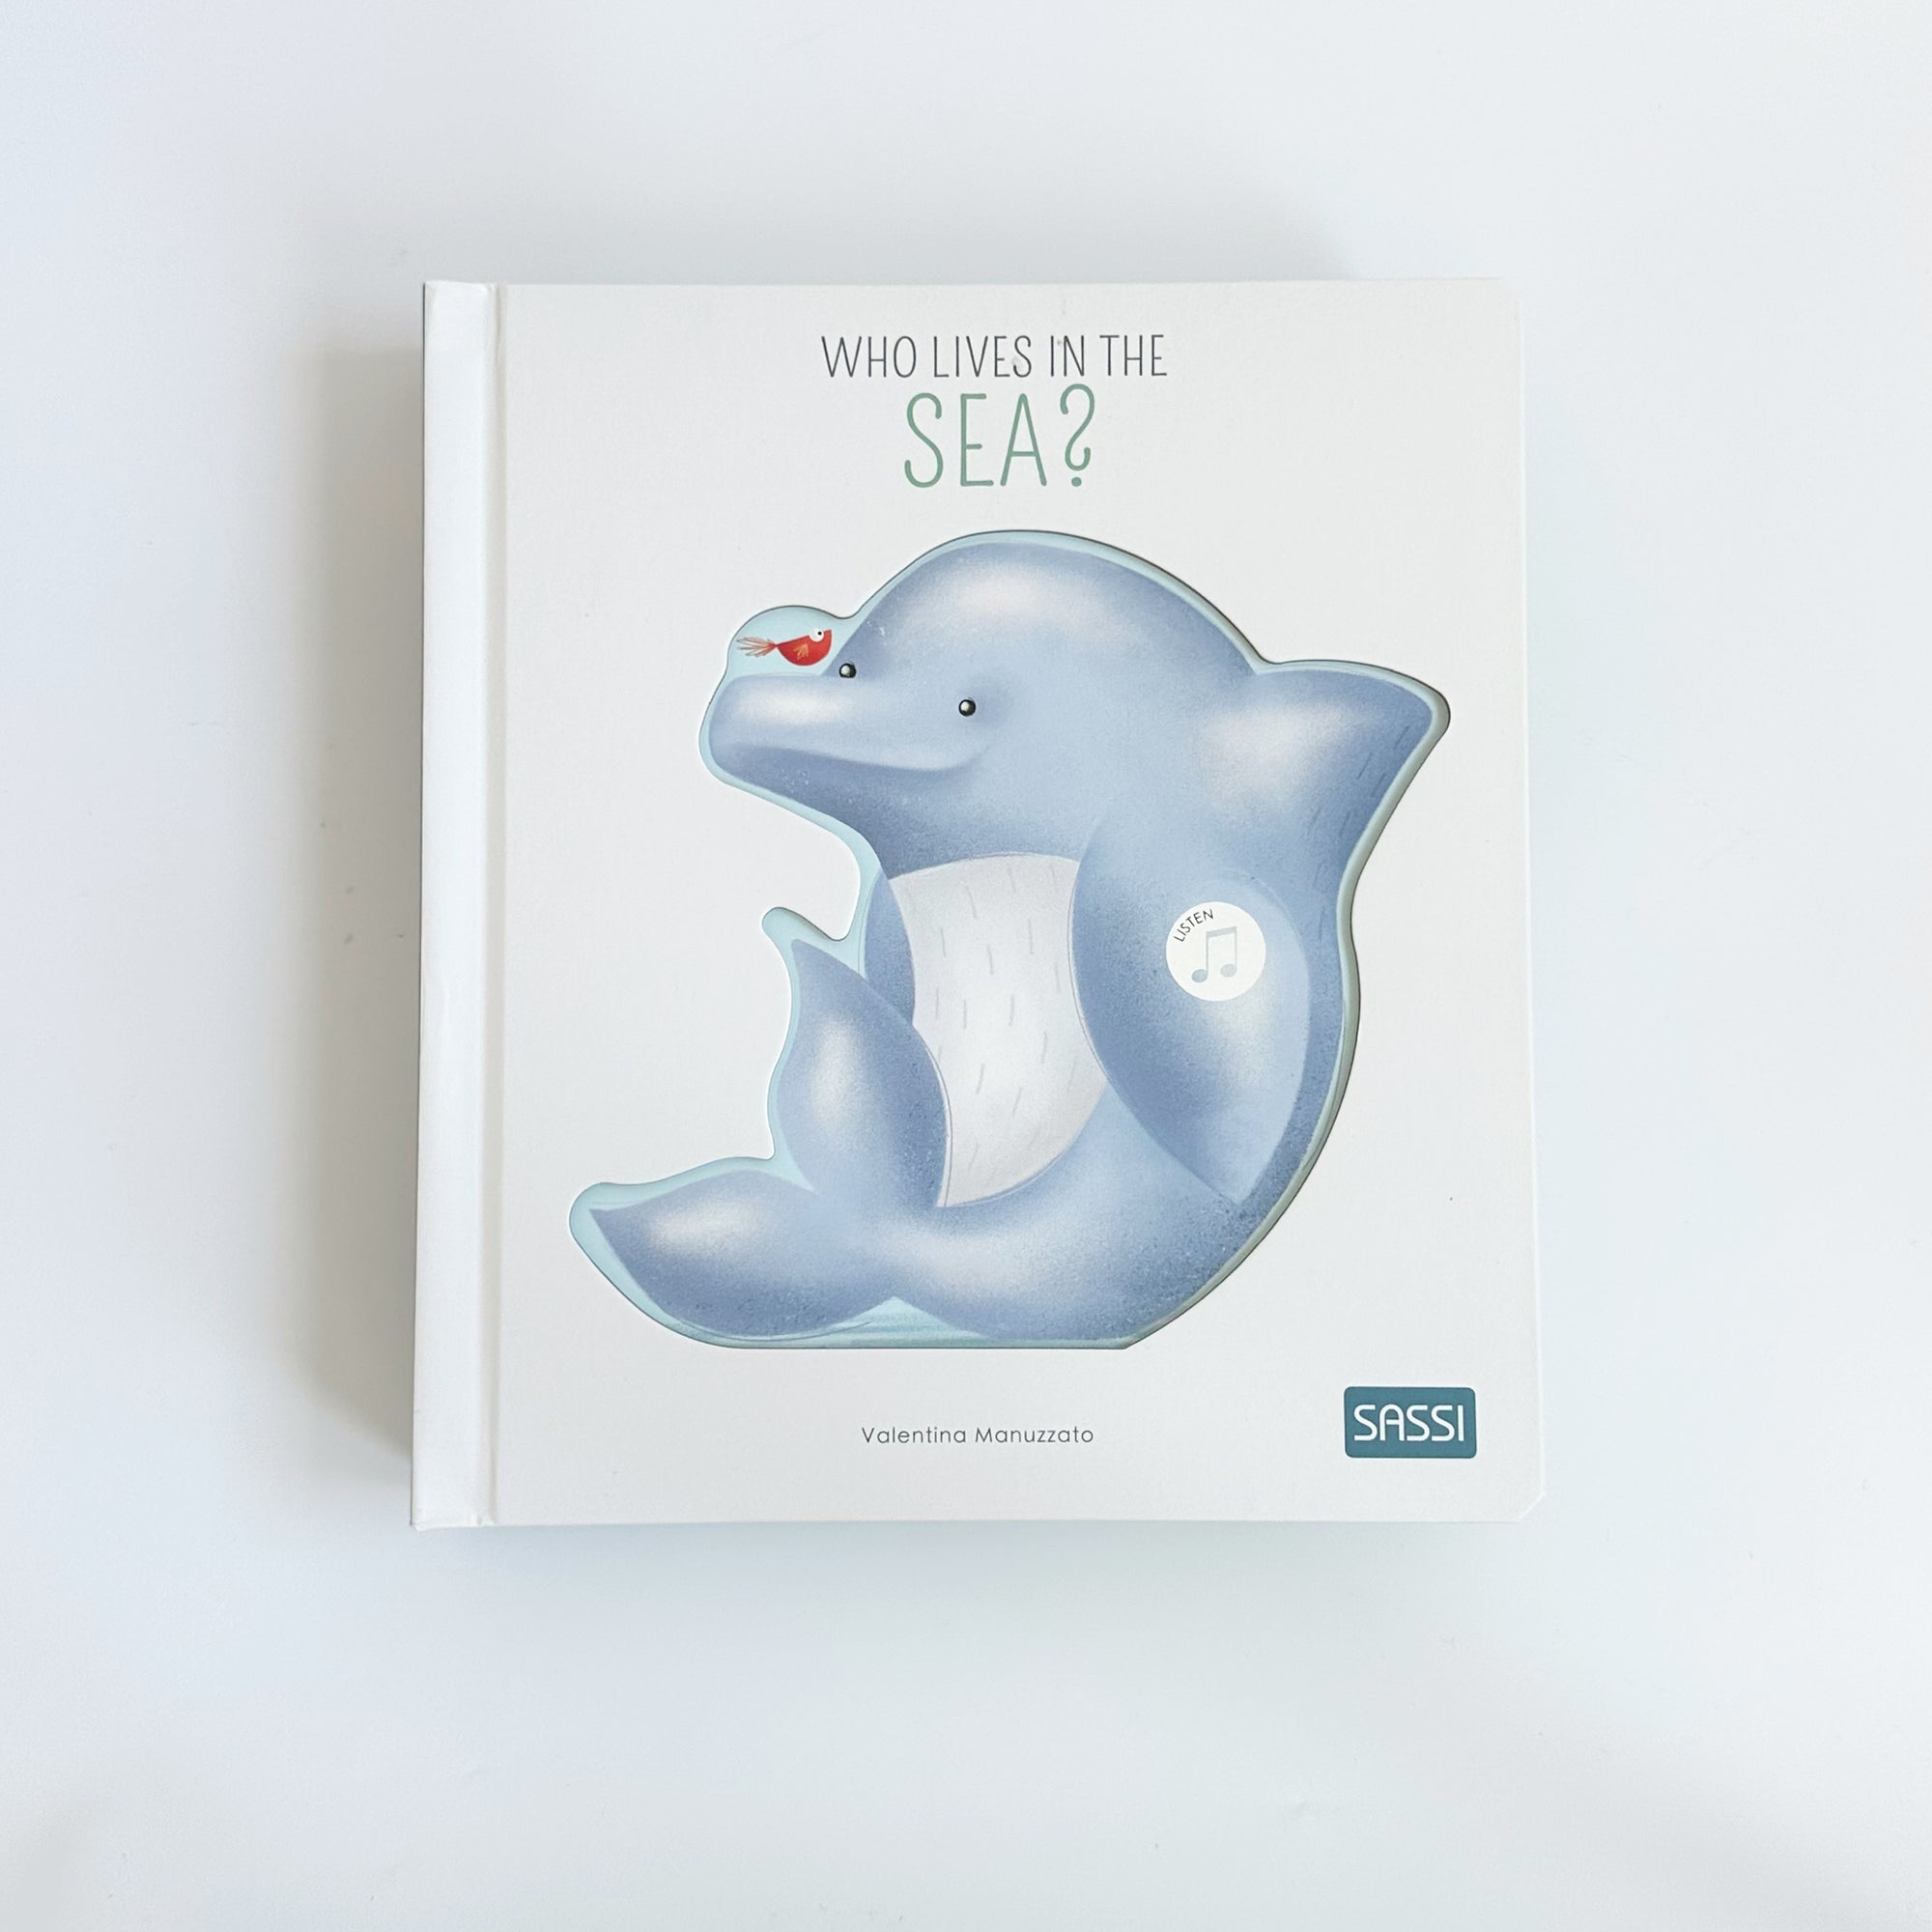 SASSI SOUND BOOK: WHO LIVES IN THE SEA